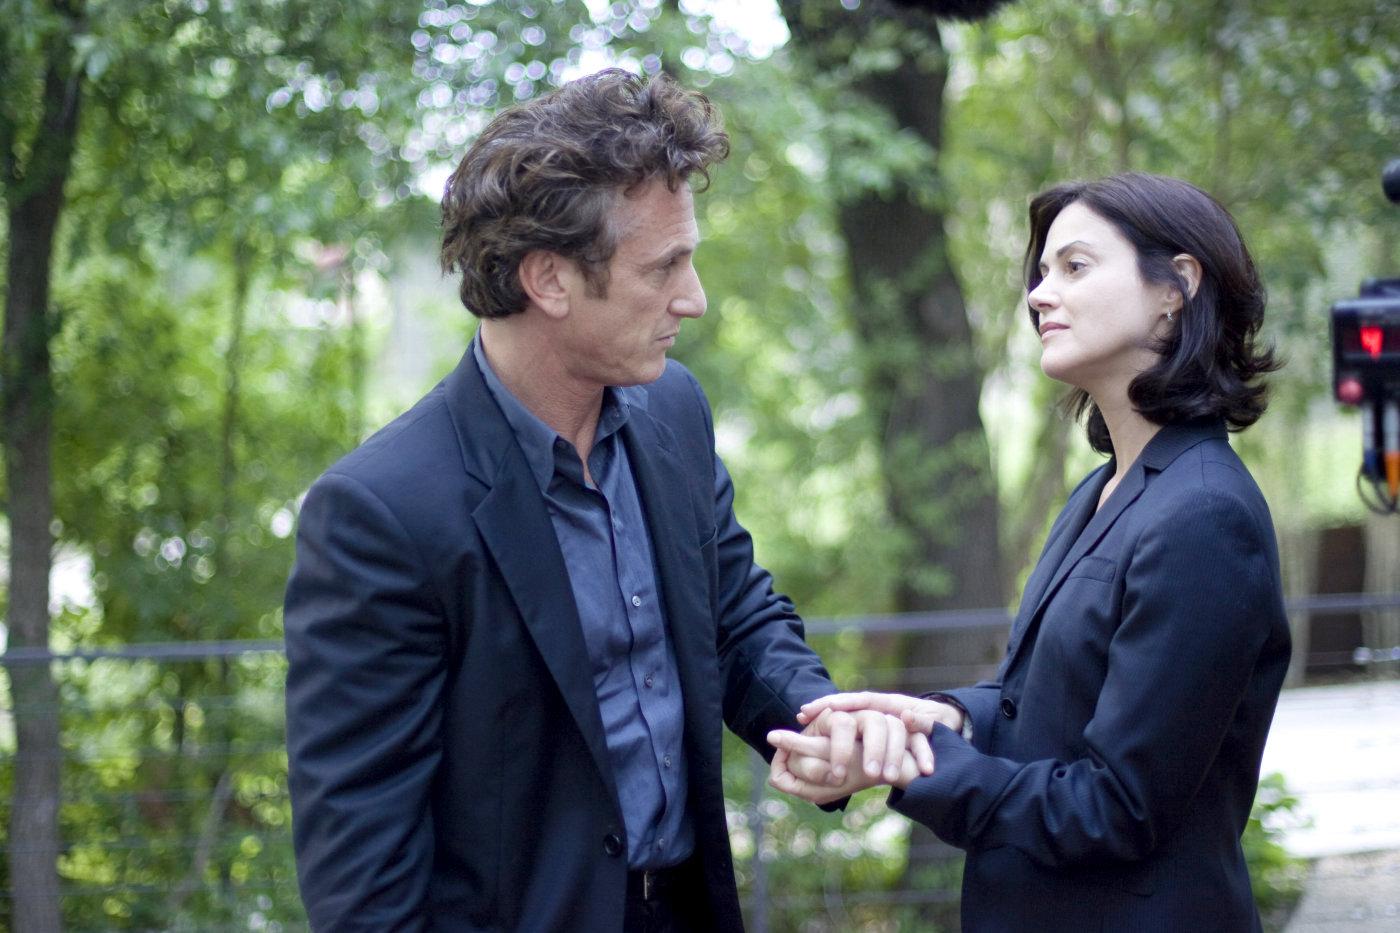 Sean Penn stars as Jack and Joanna Going stars as Jack's Wife in Fox Searchlight Pictures' The Tree of Life (2011)